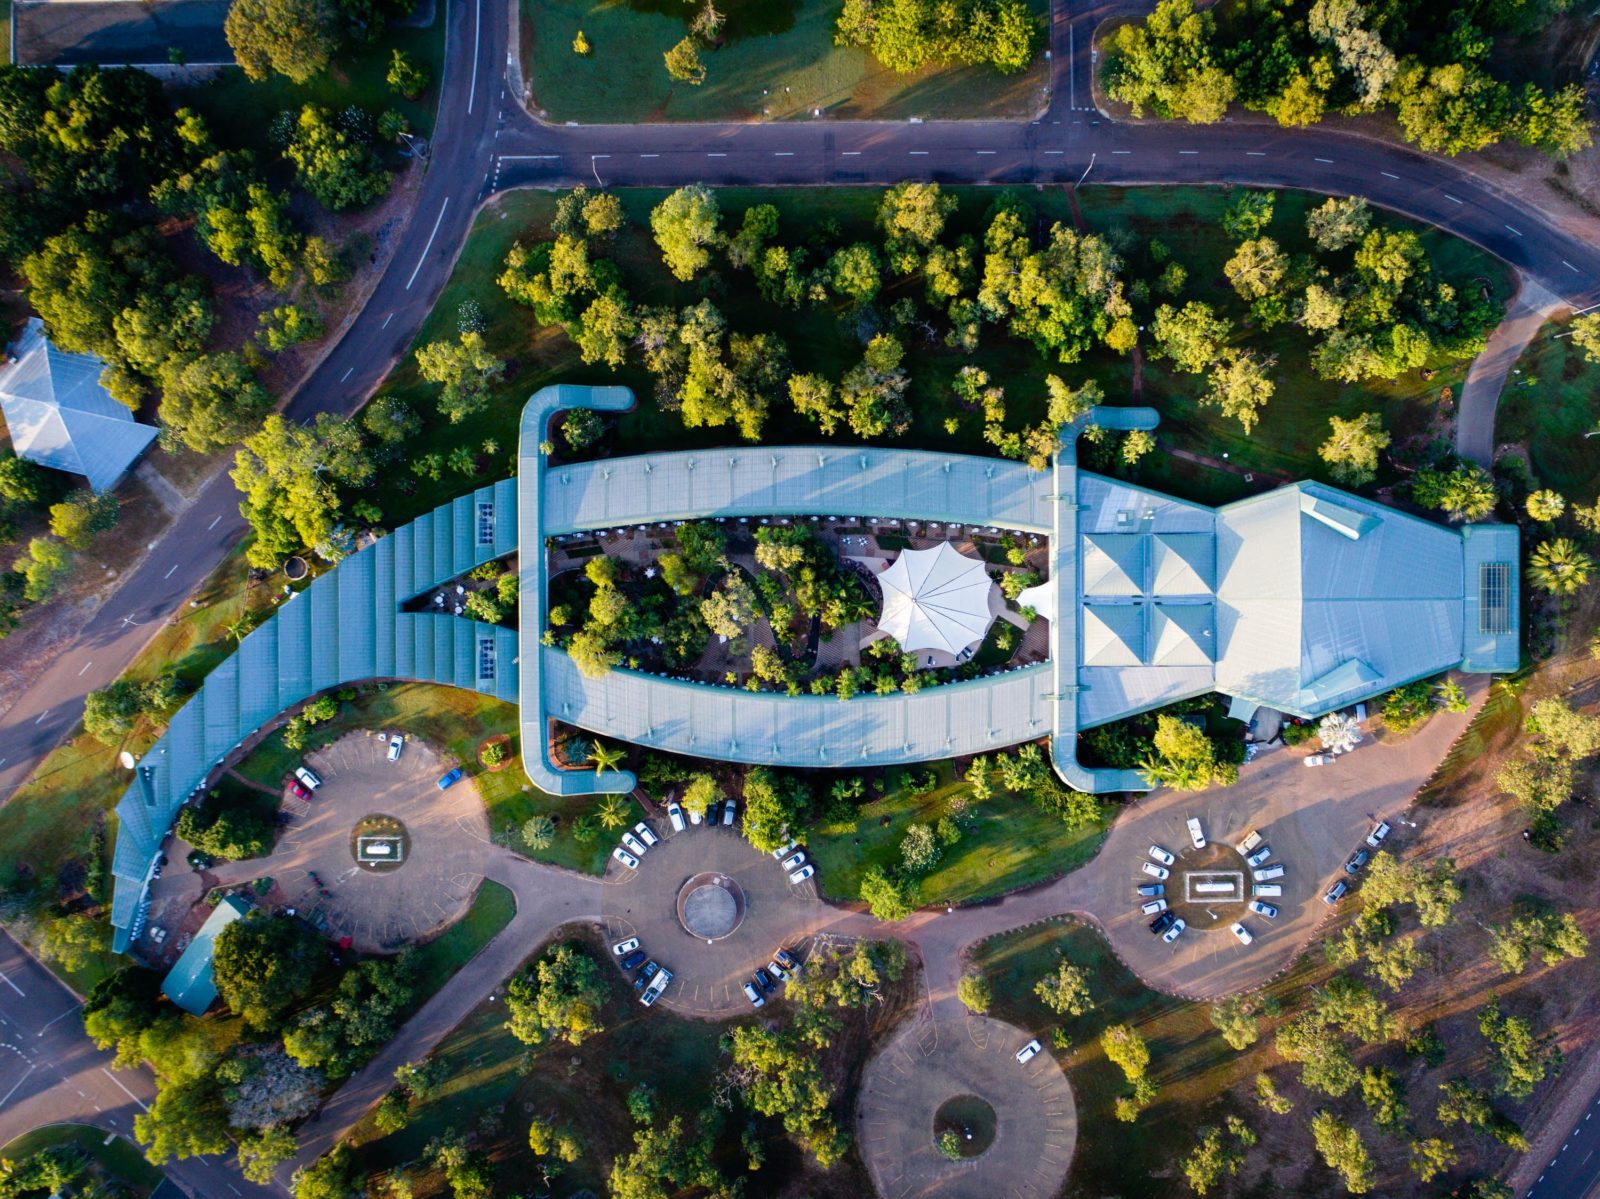 Aerial View of the crocodile shaped hotel